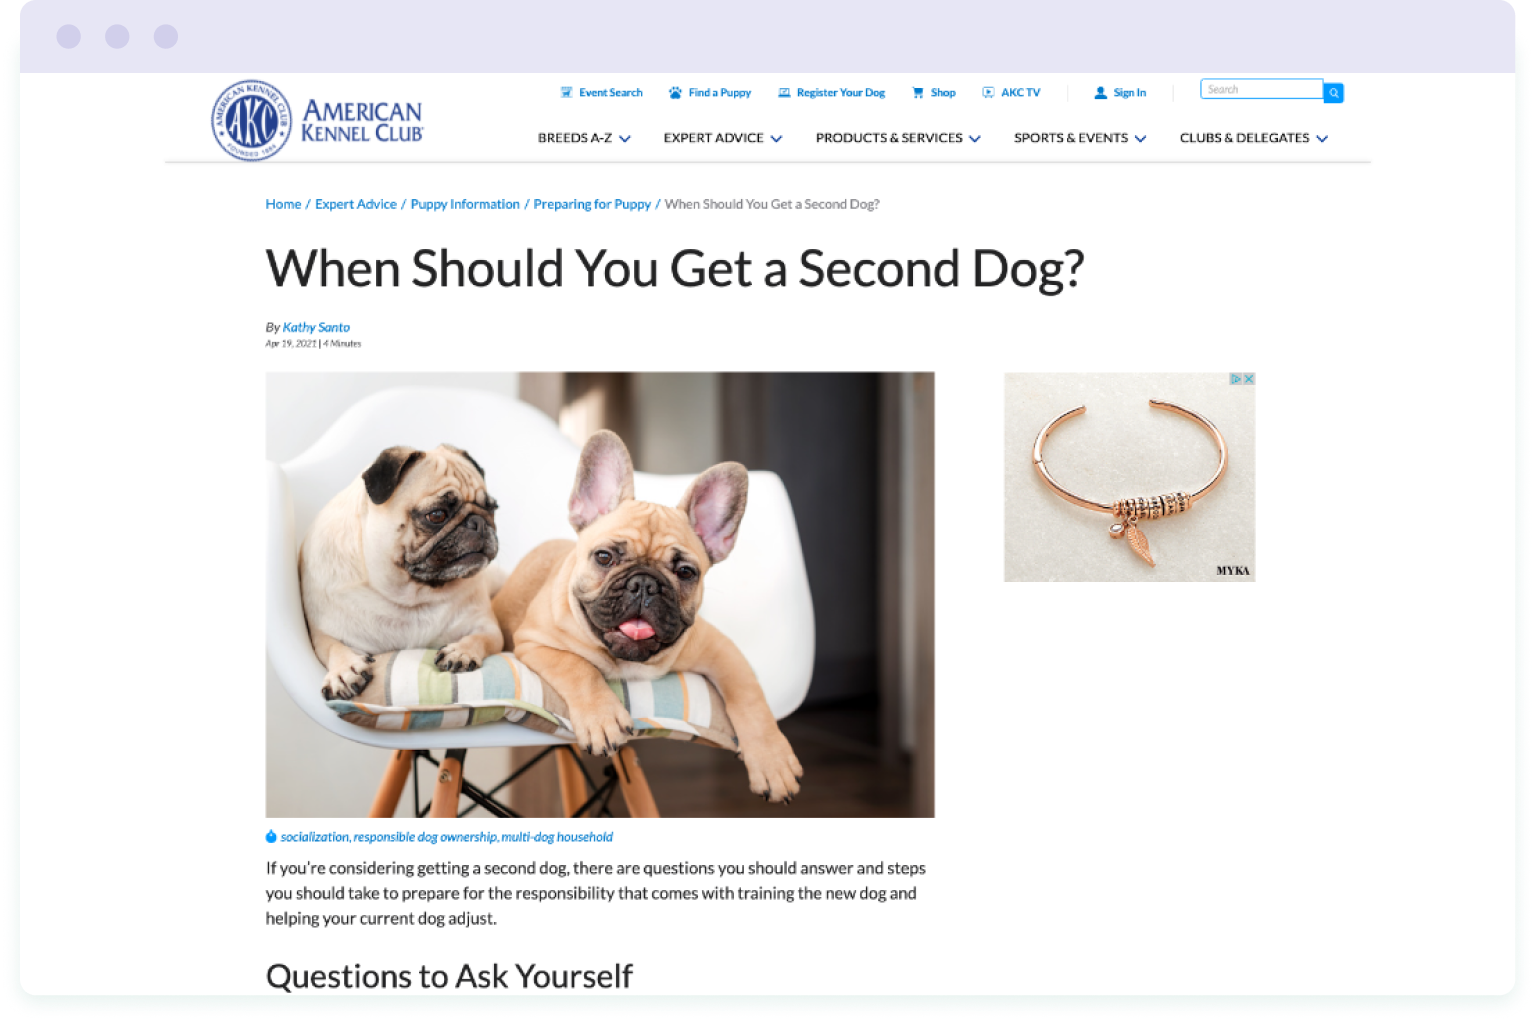 Screenshot of a page on the American Kennel Club website explaining when you should get a second dog